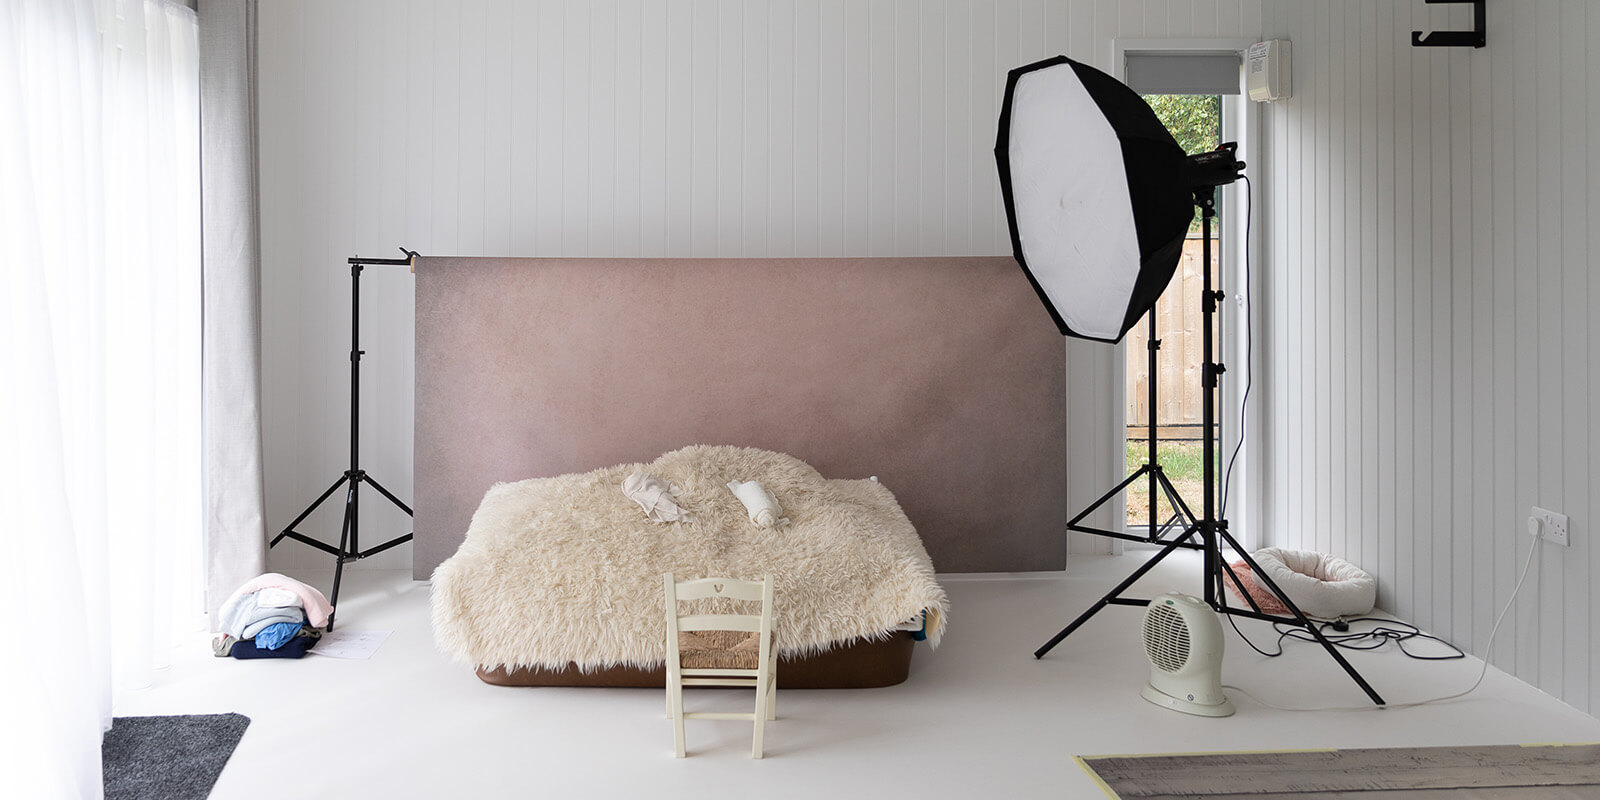 Interior of a garden photo studio with lighting equipment, backdrop and props 